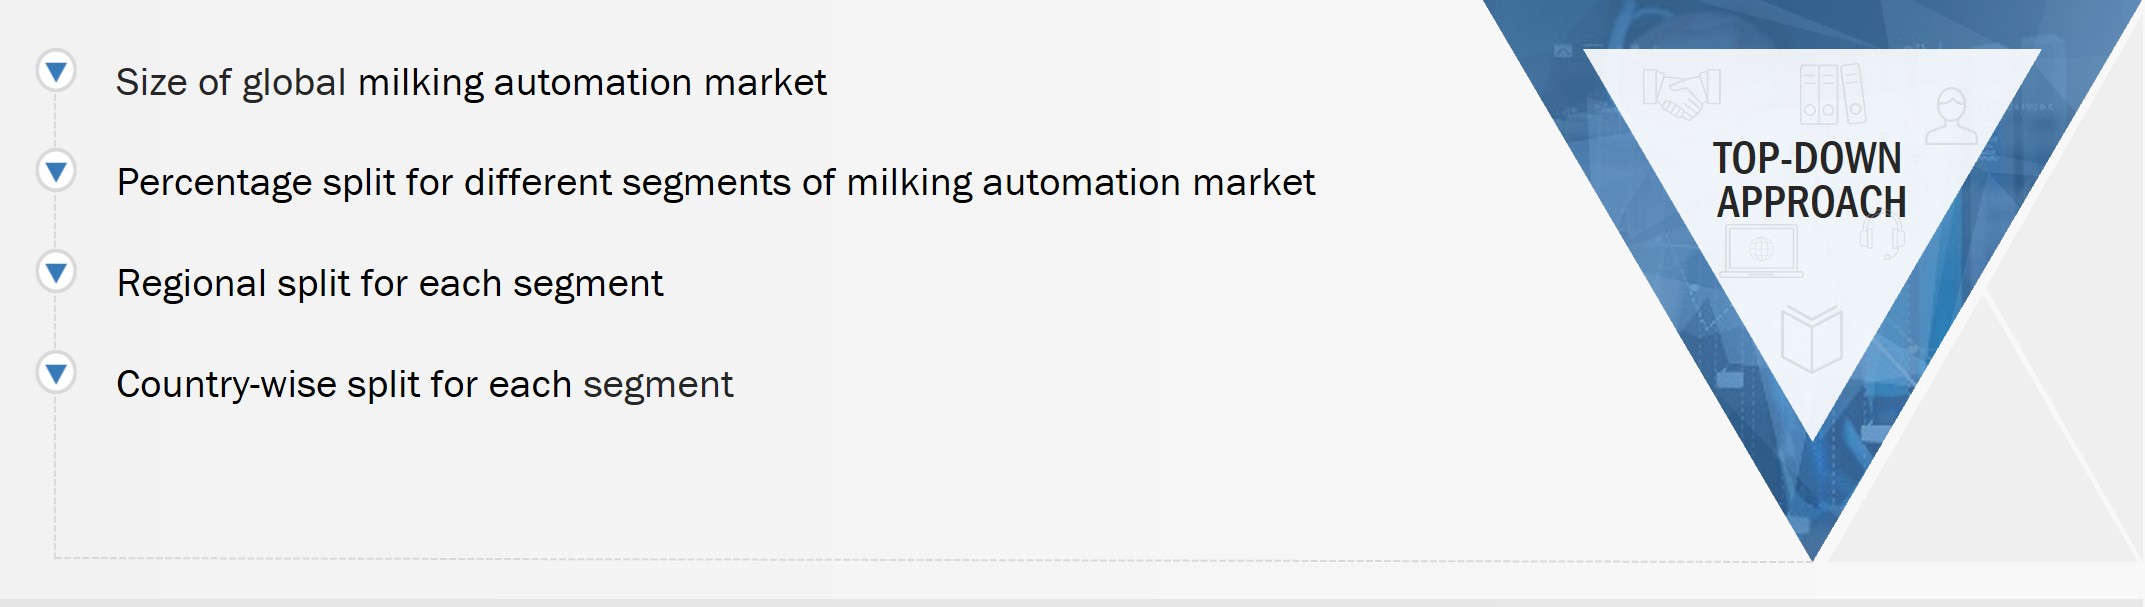 Milking Automation Market Size, and Top-Down Approach 